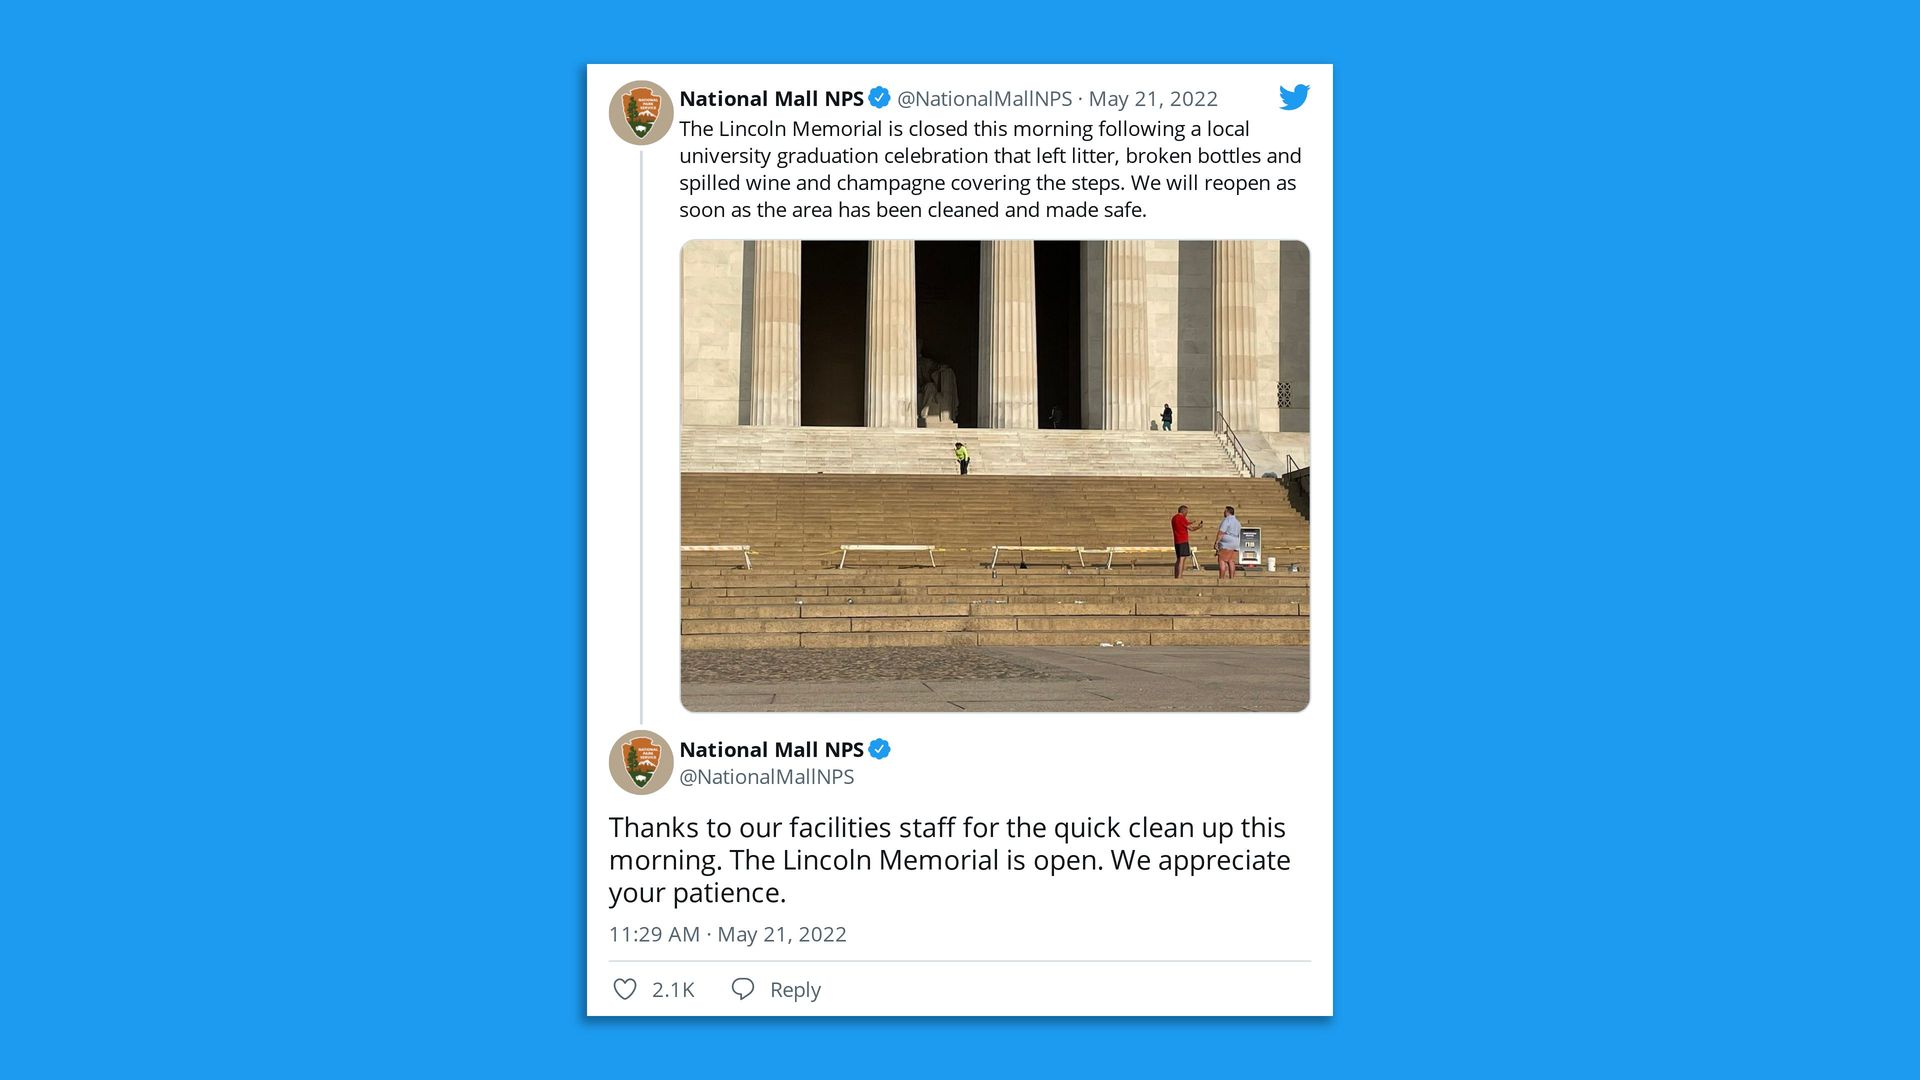 An NPS tweet showing picture of closed Lincoln Memorial due to litter